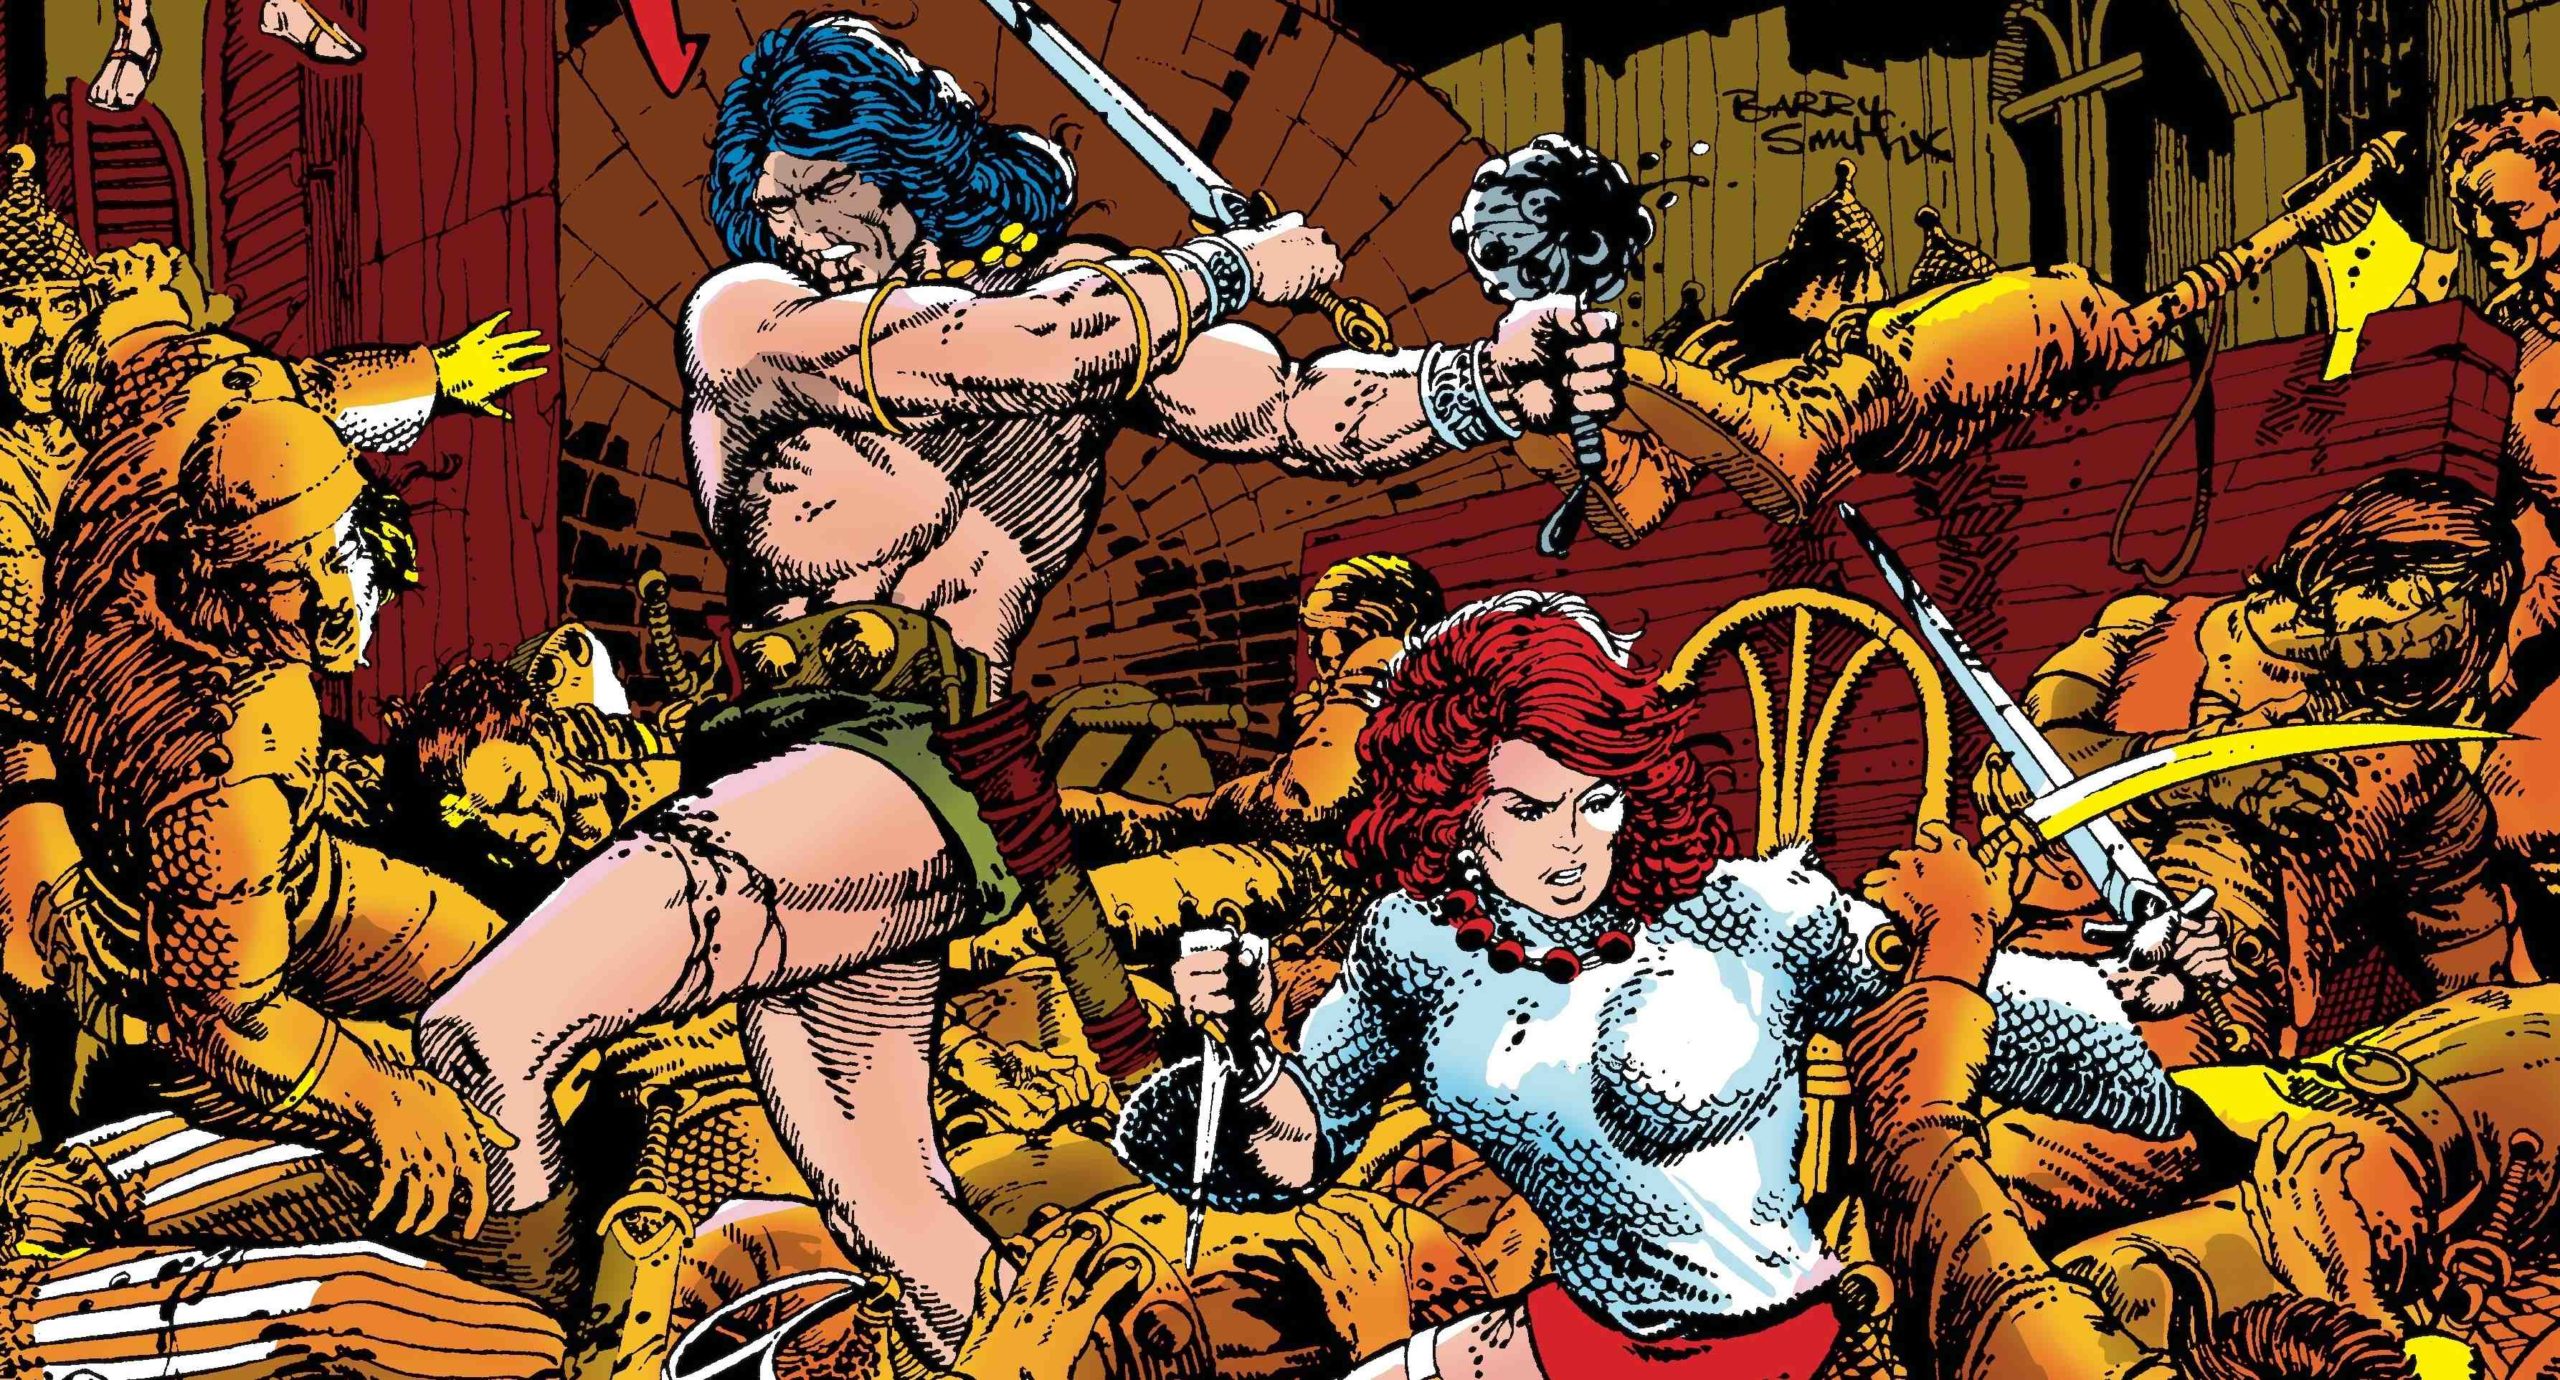 Is Red Sonja part of Conan the Barbarian series?